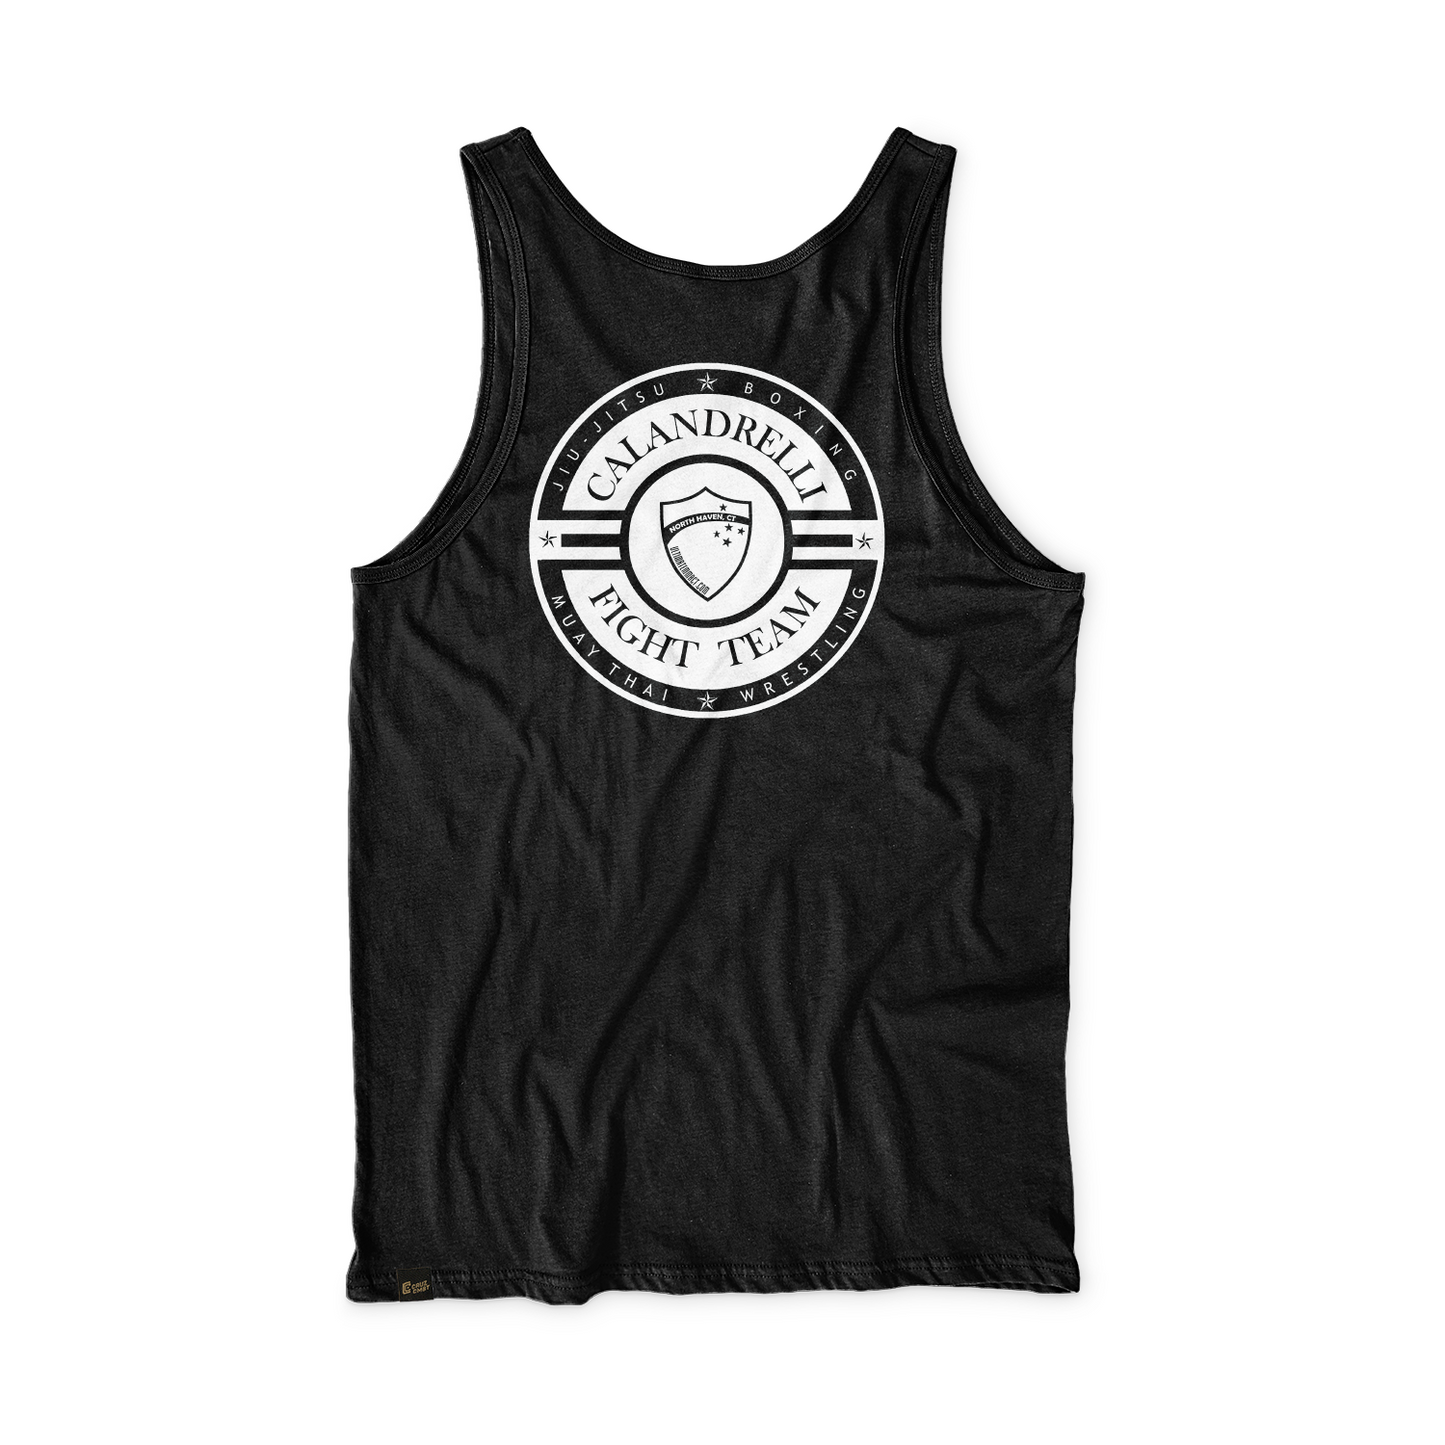 Ultimate MMA men's performance tank Competition Team, black